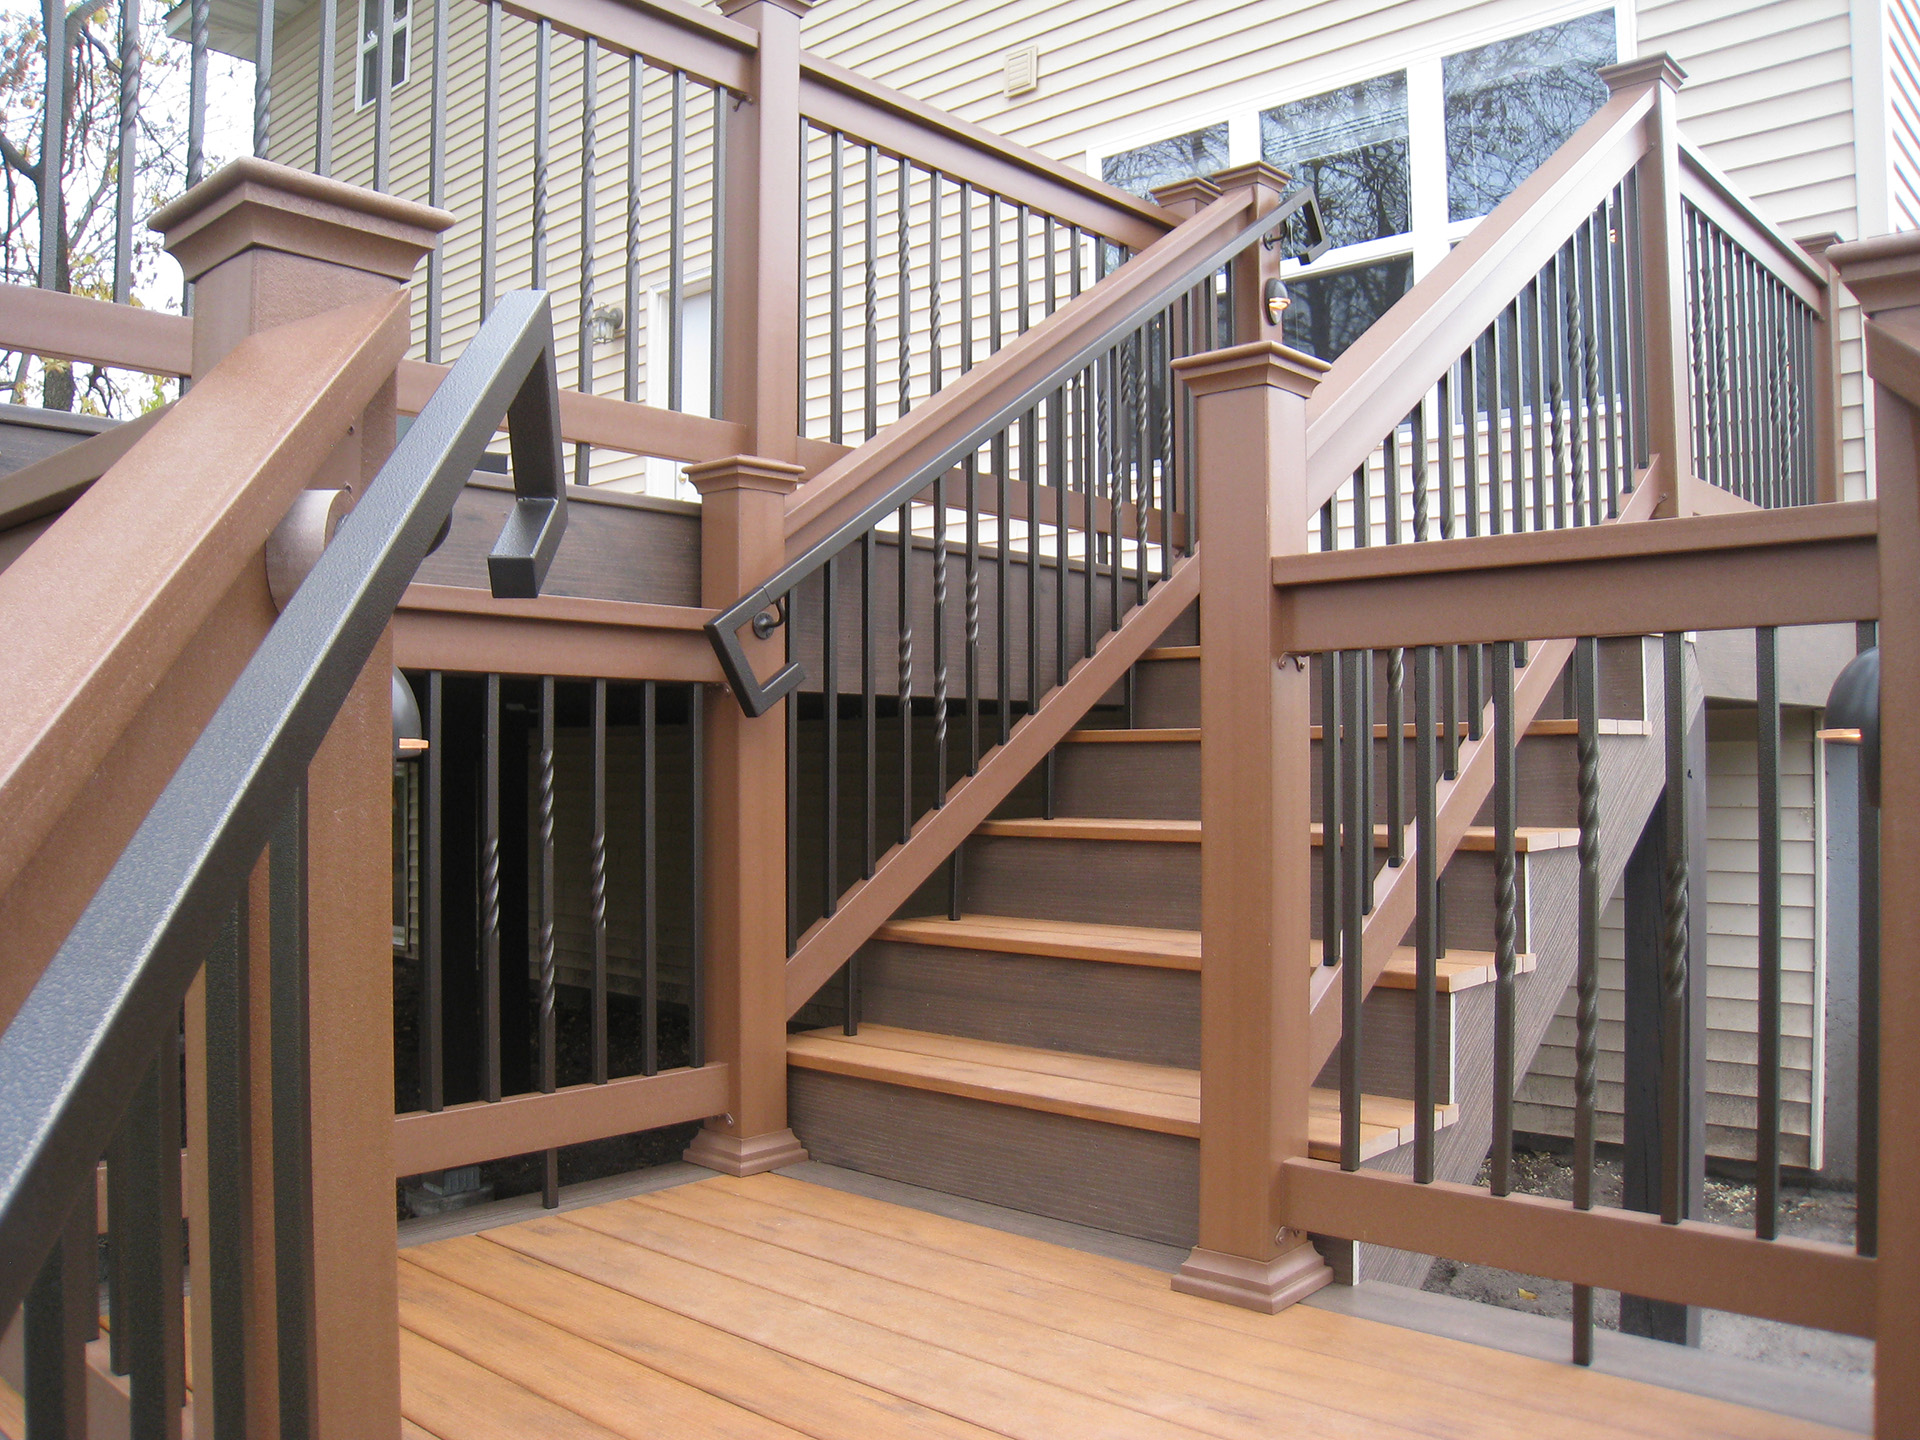 Deck stairs leading to upper level of a multilevel deck